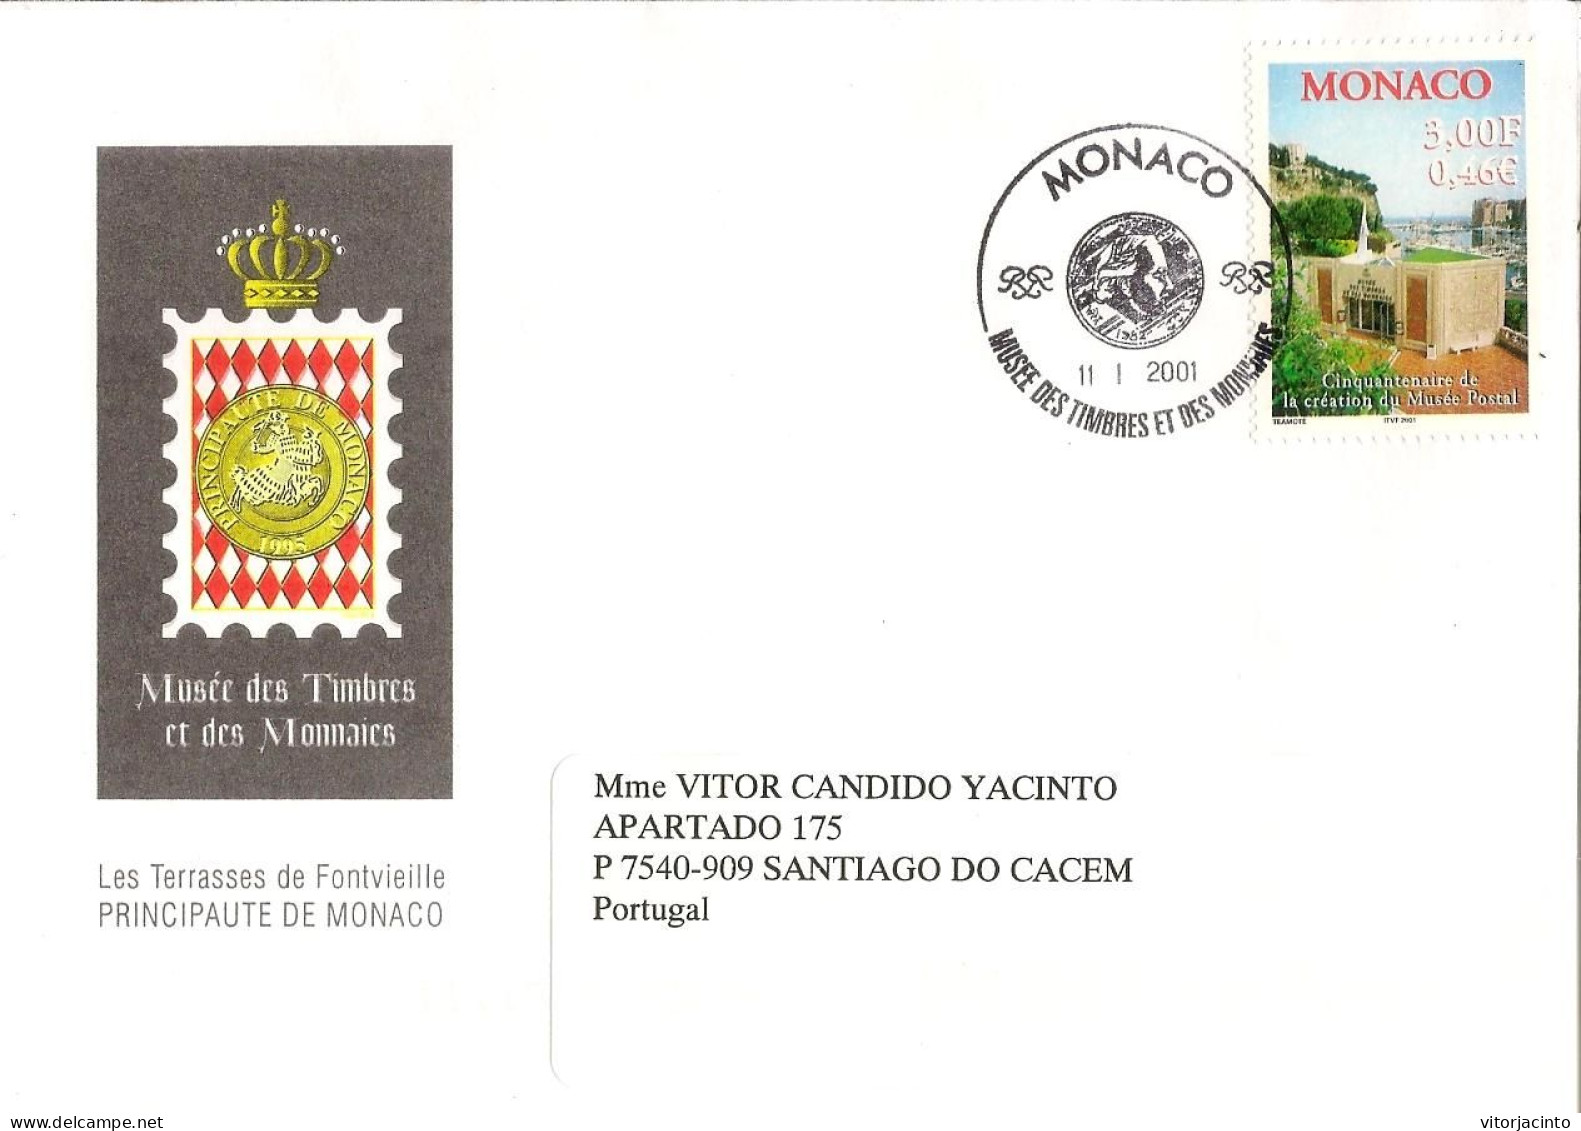 Monaco - Museum Of Stamps And Coins - Commemorative Postmark 2001 - Postmarks